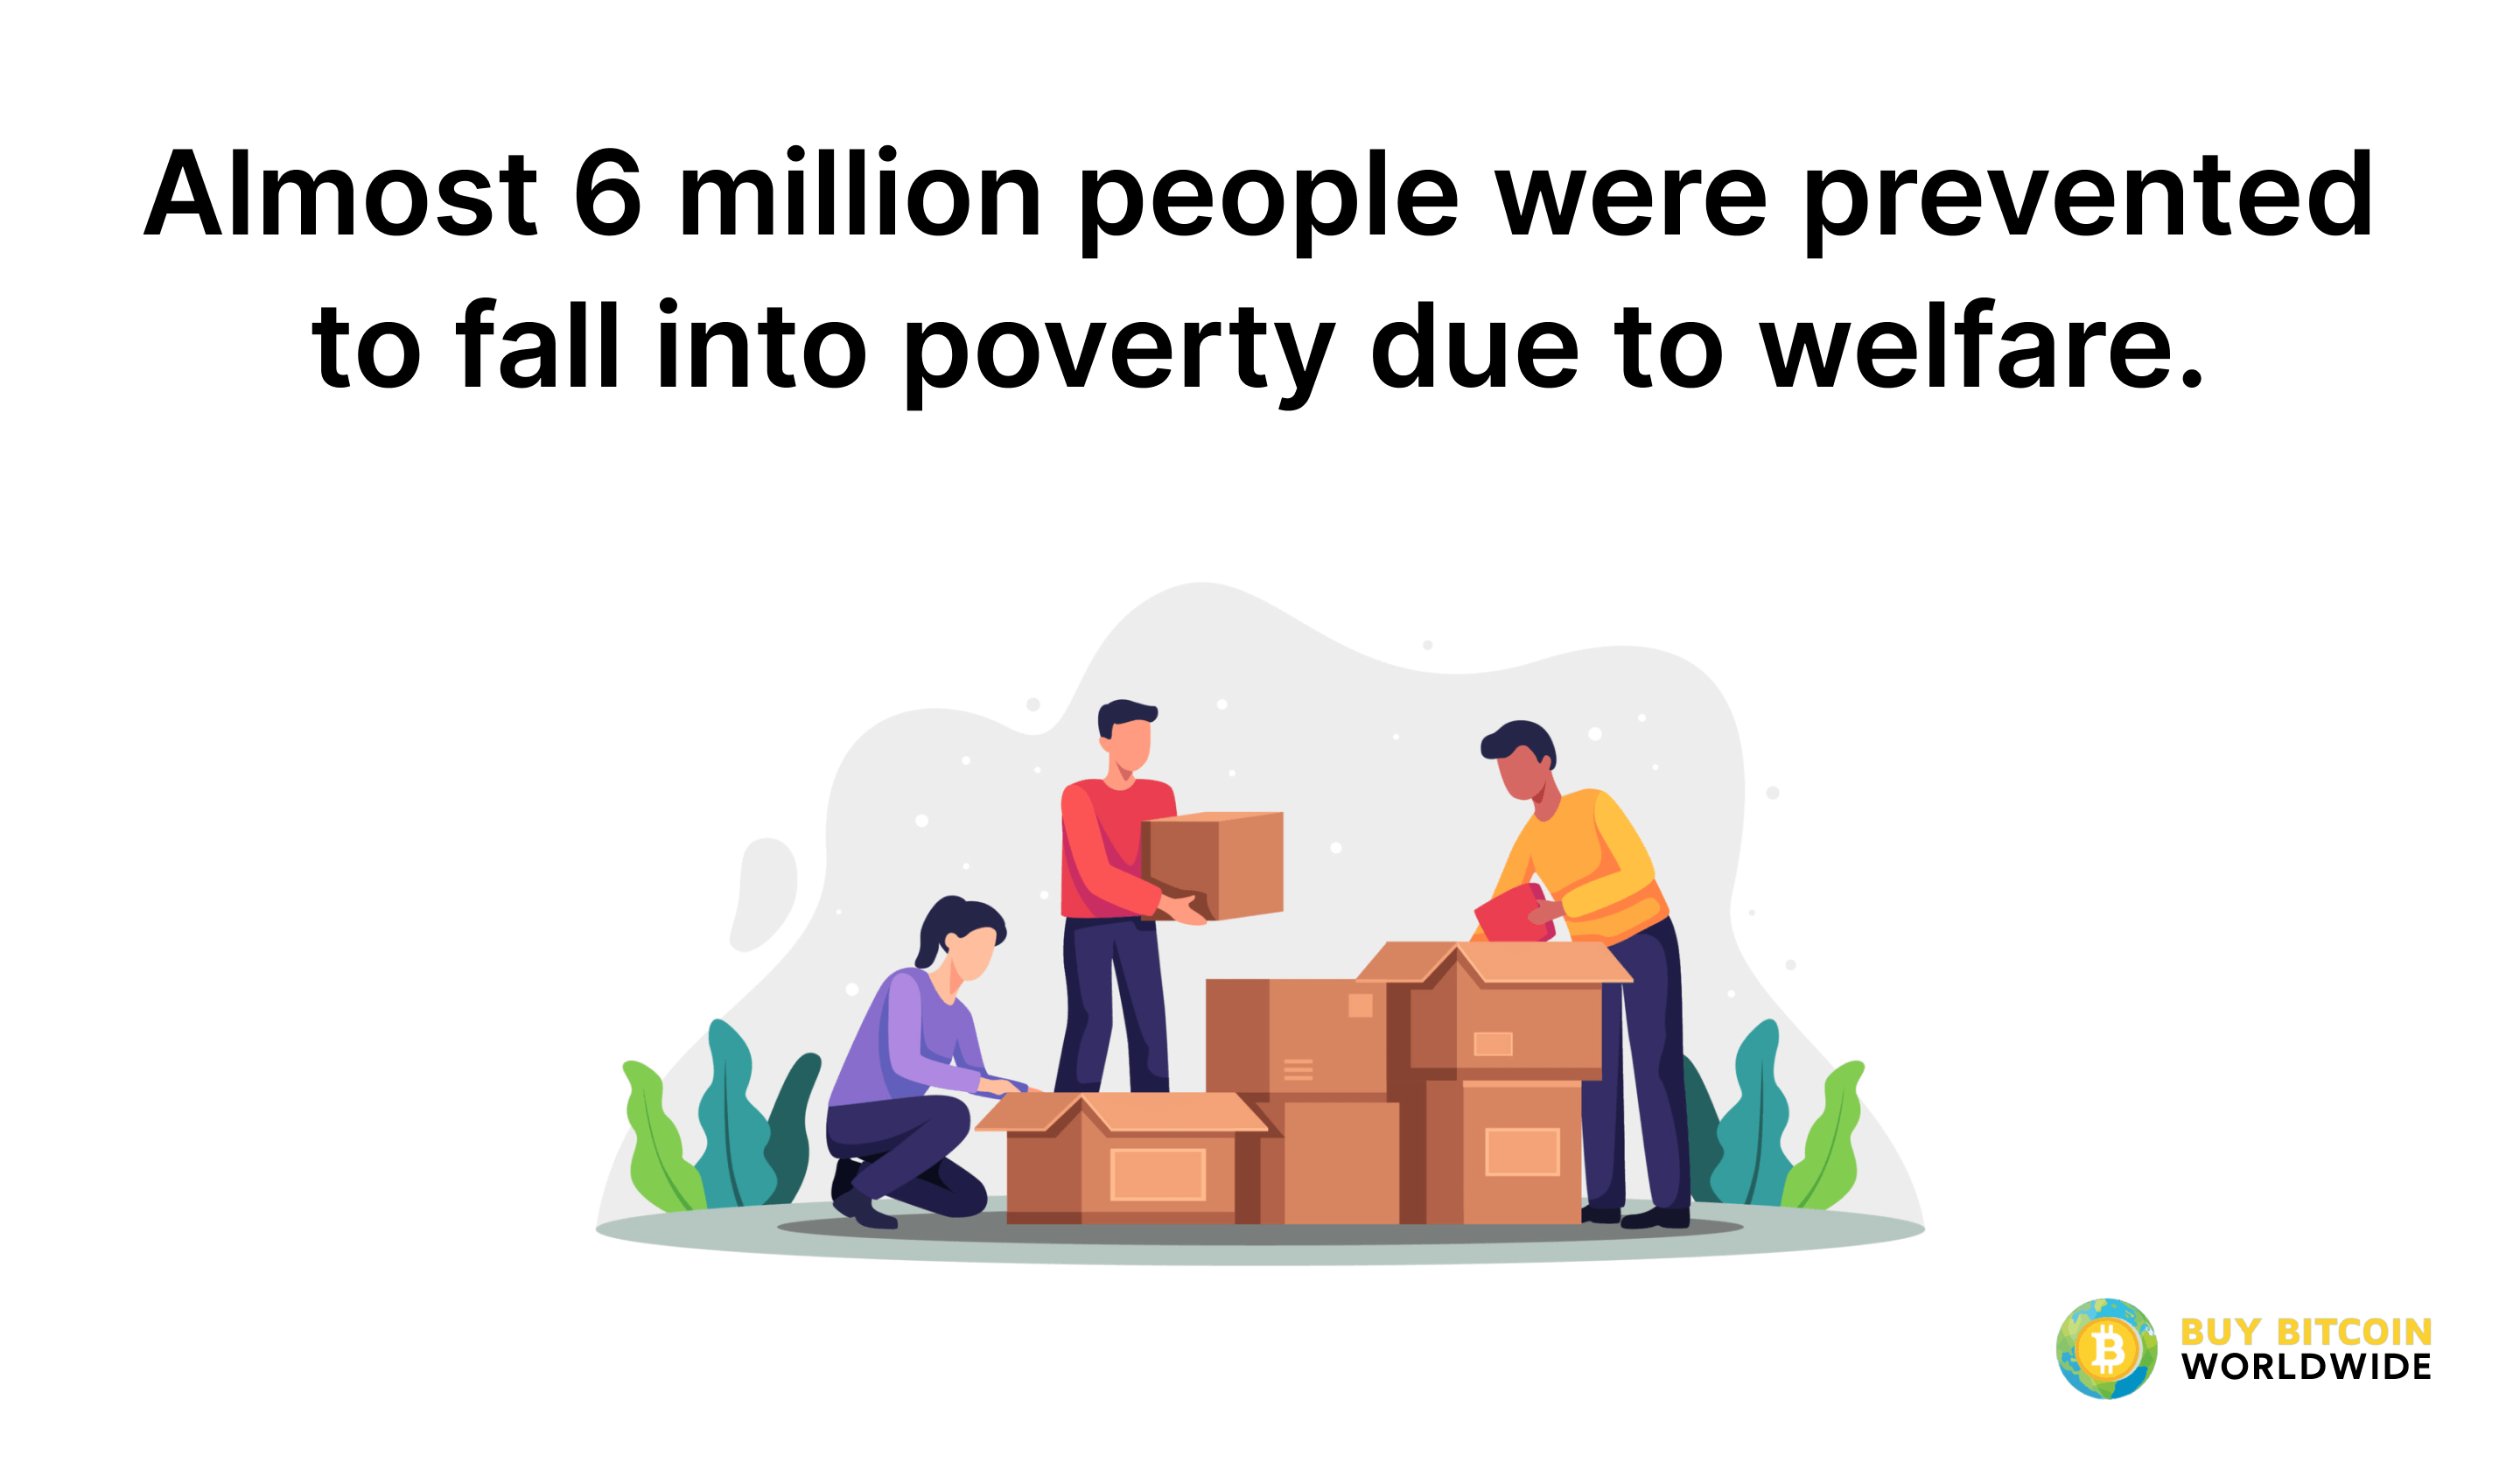 number of people who were prevented to fall into poverty due to welfare